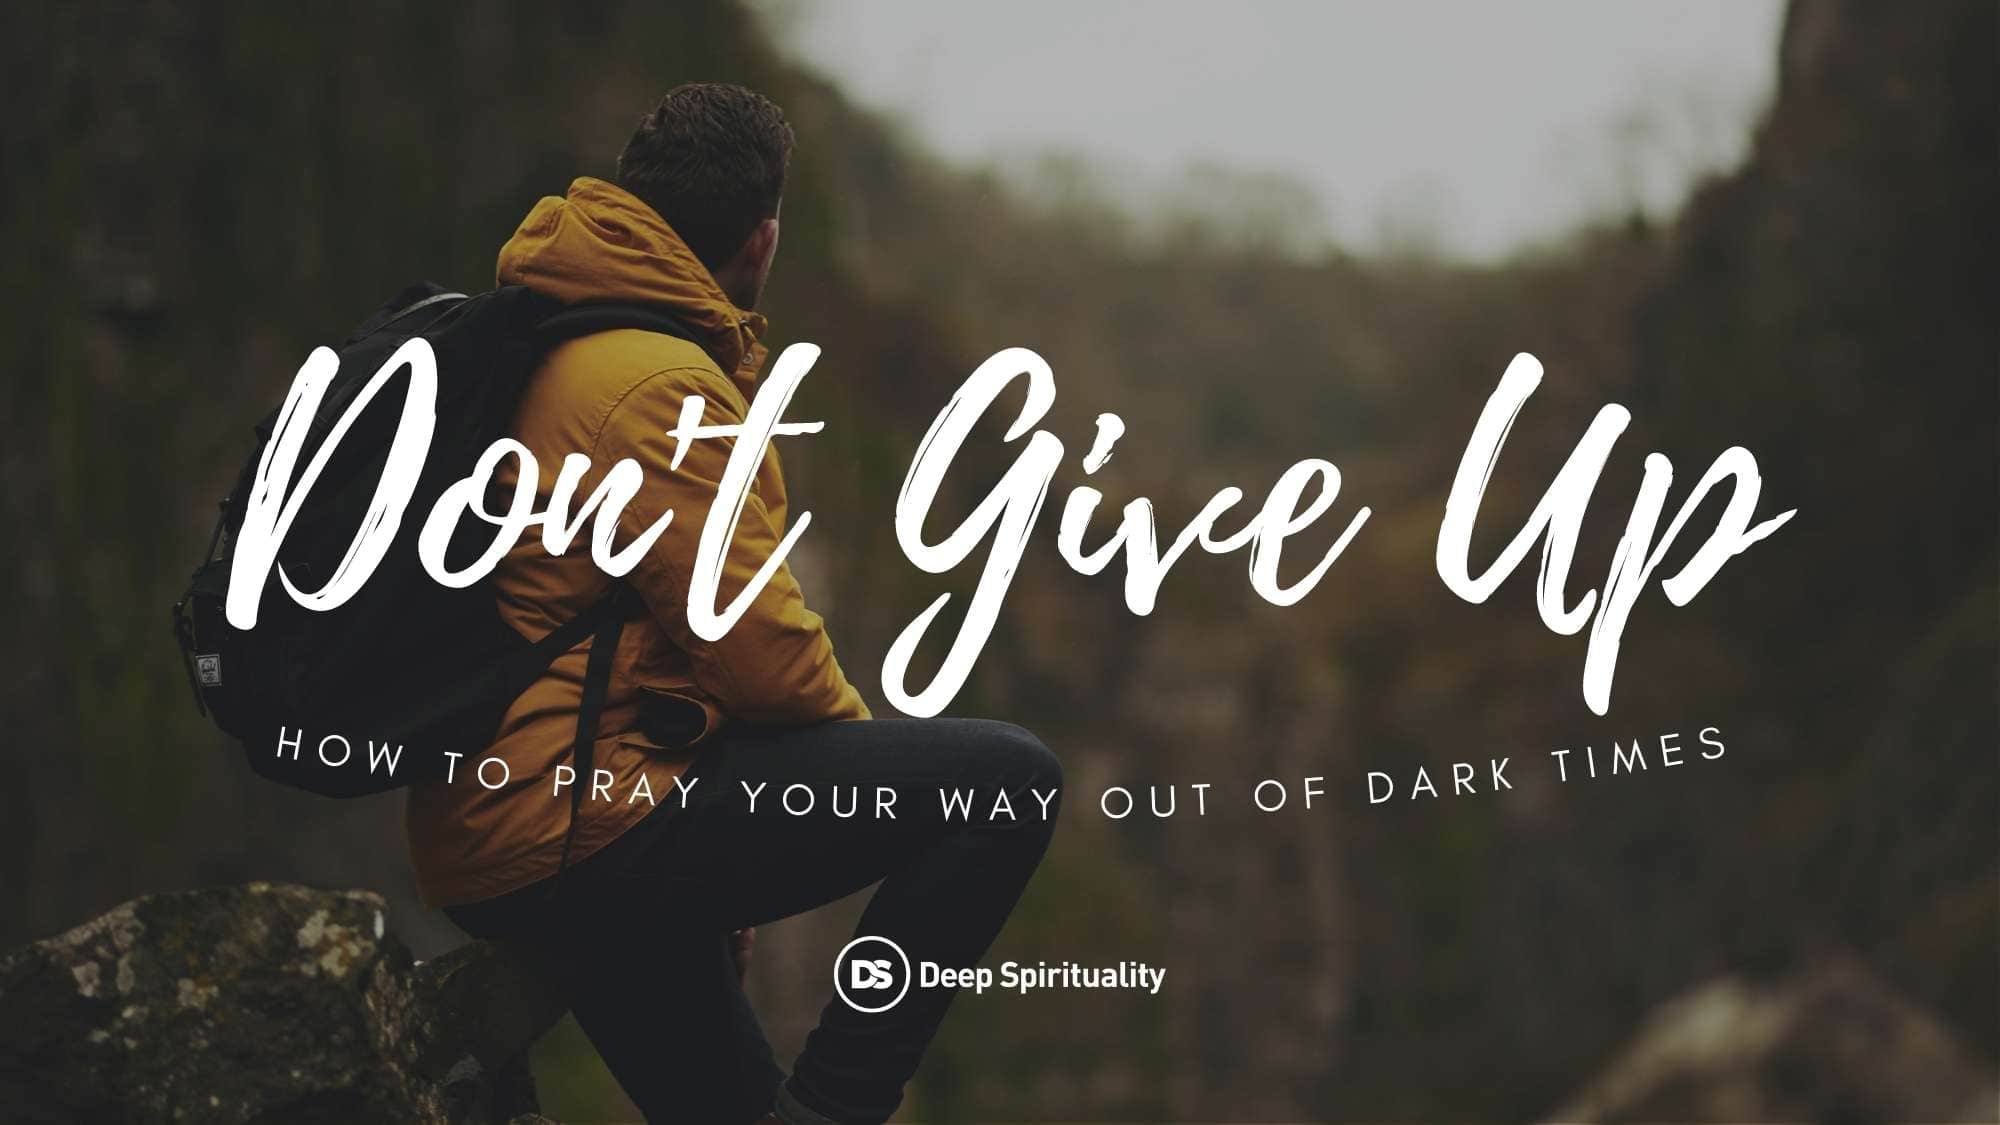 Don't Give Up: How to Pray Your Way out of Dark Times  18